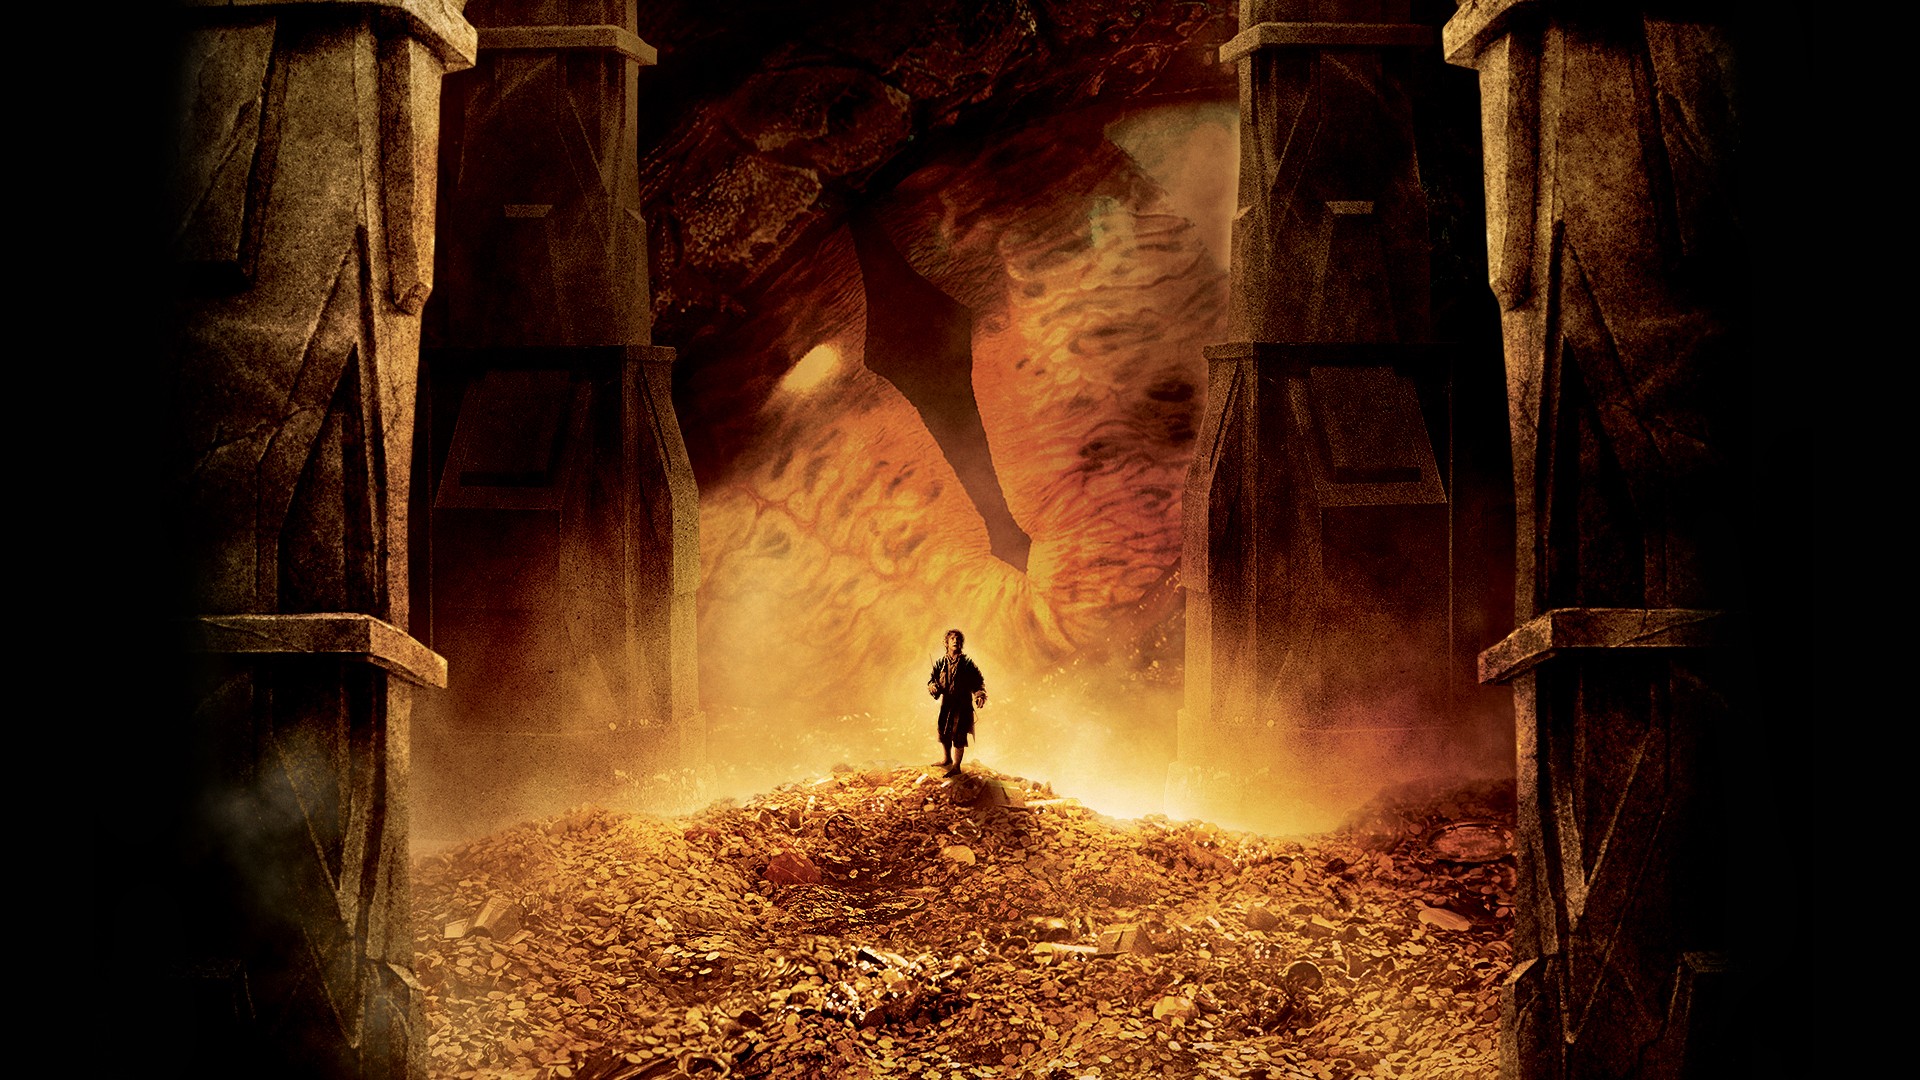 The Hobbit The Desolation of Smaug Backgrounds